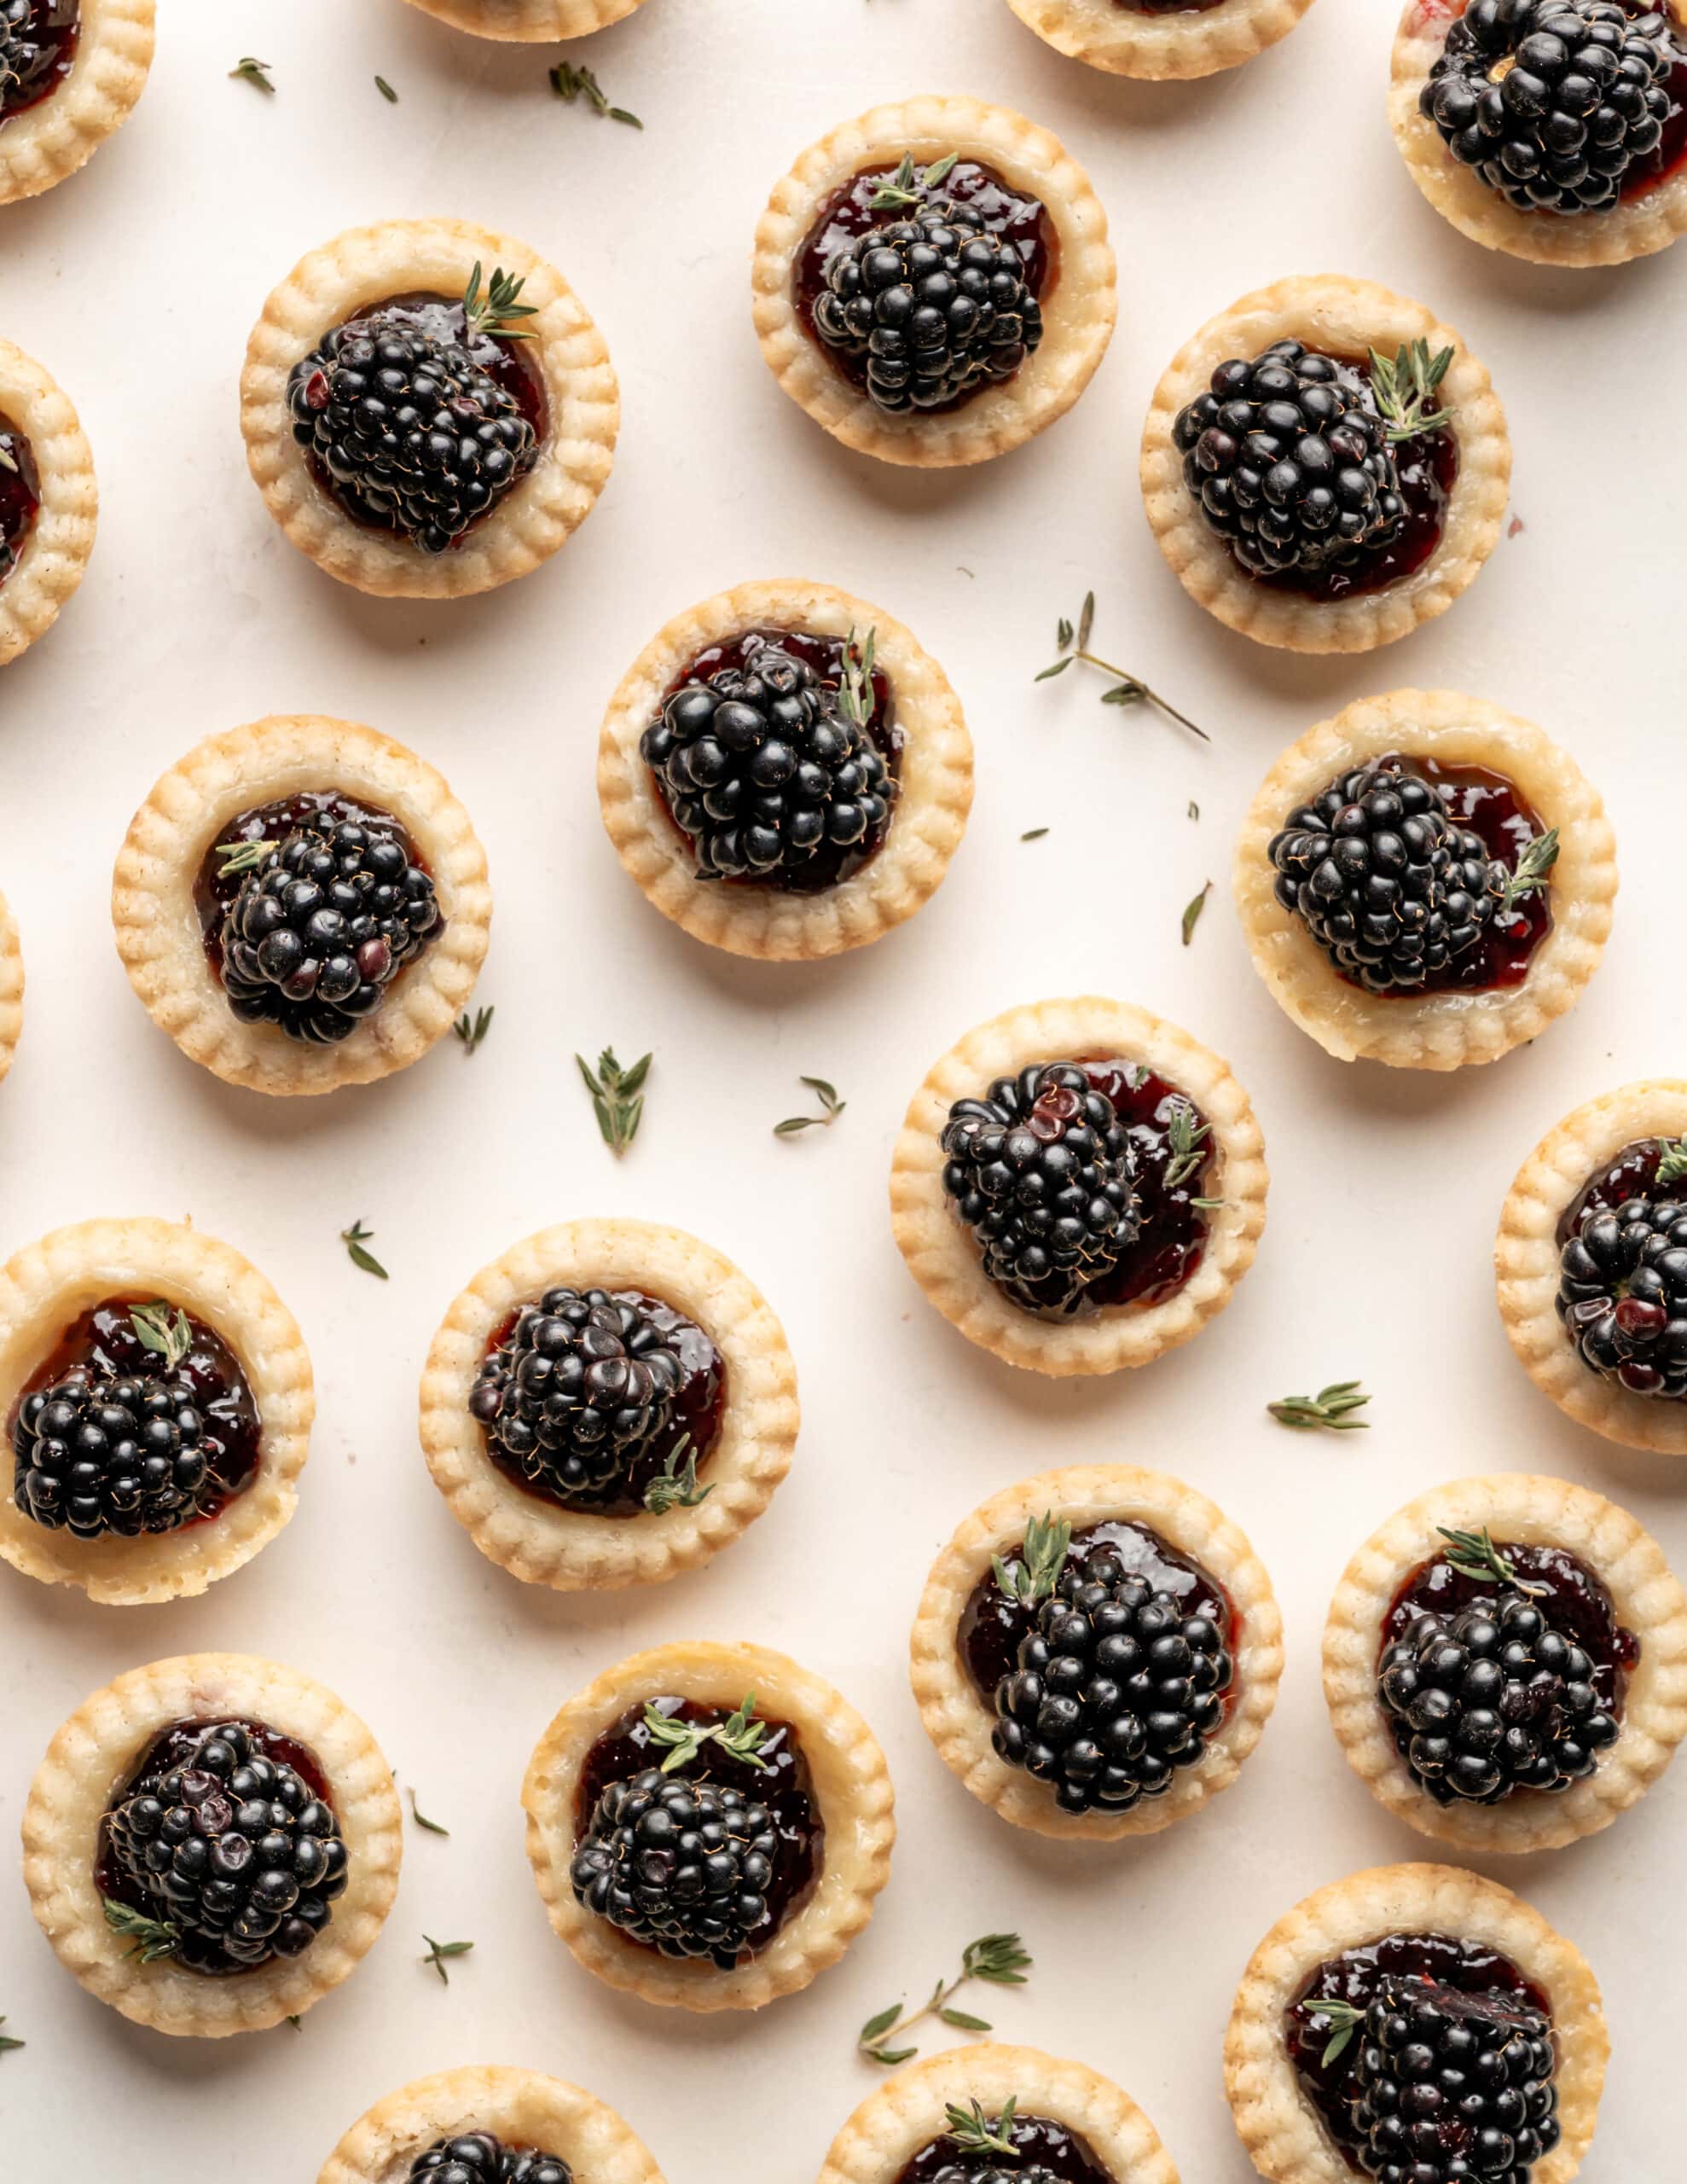 Miniature tart shells filled with melted brie, blackberry jam, and topped with fresh blackberries and thyme.  